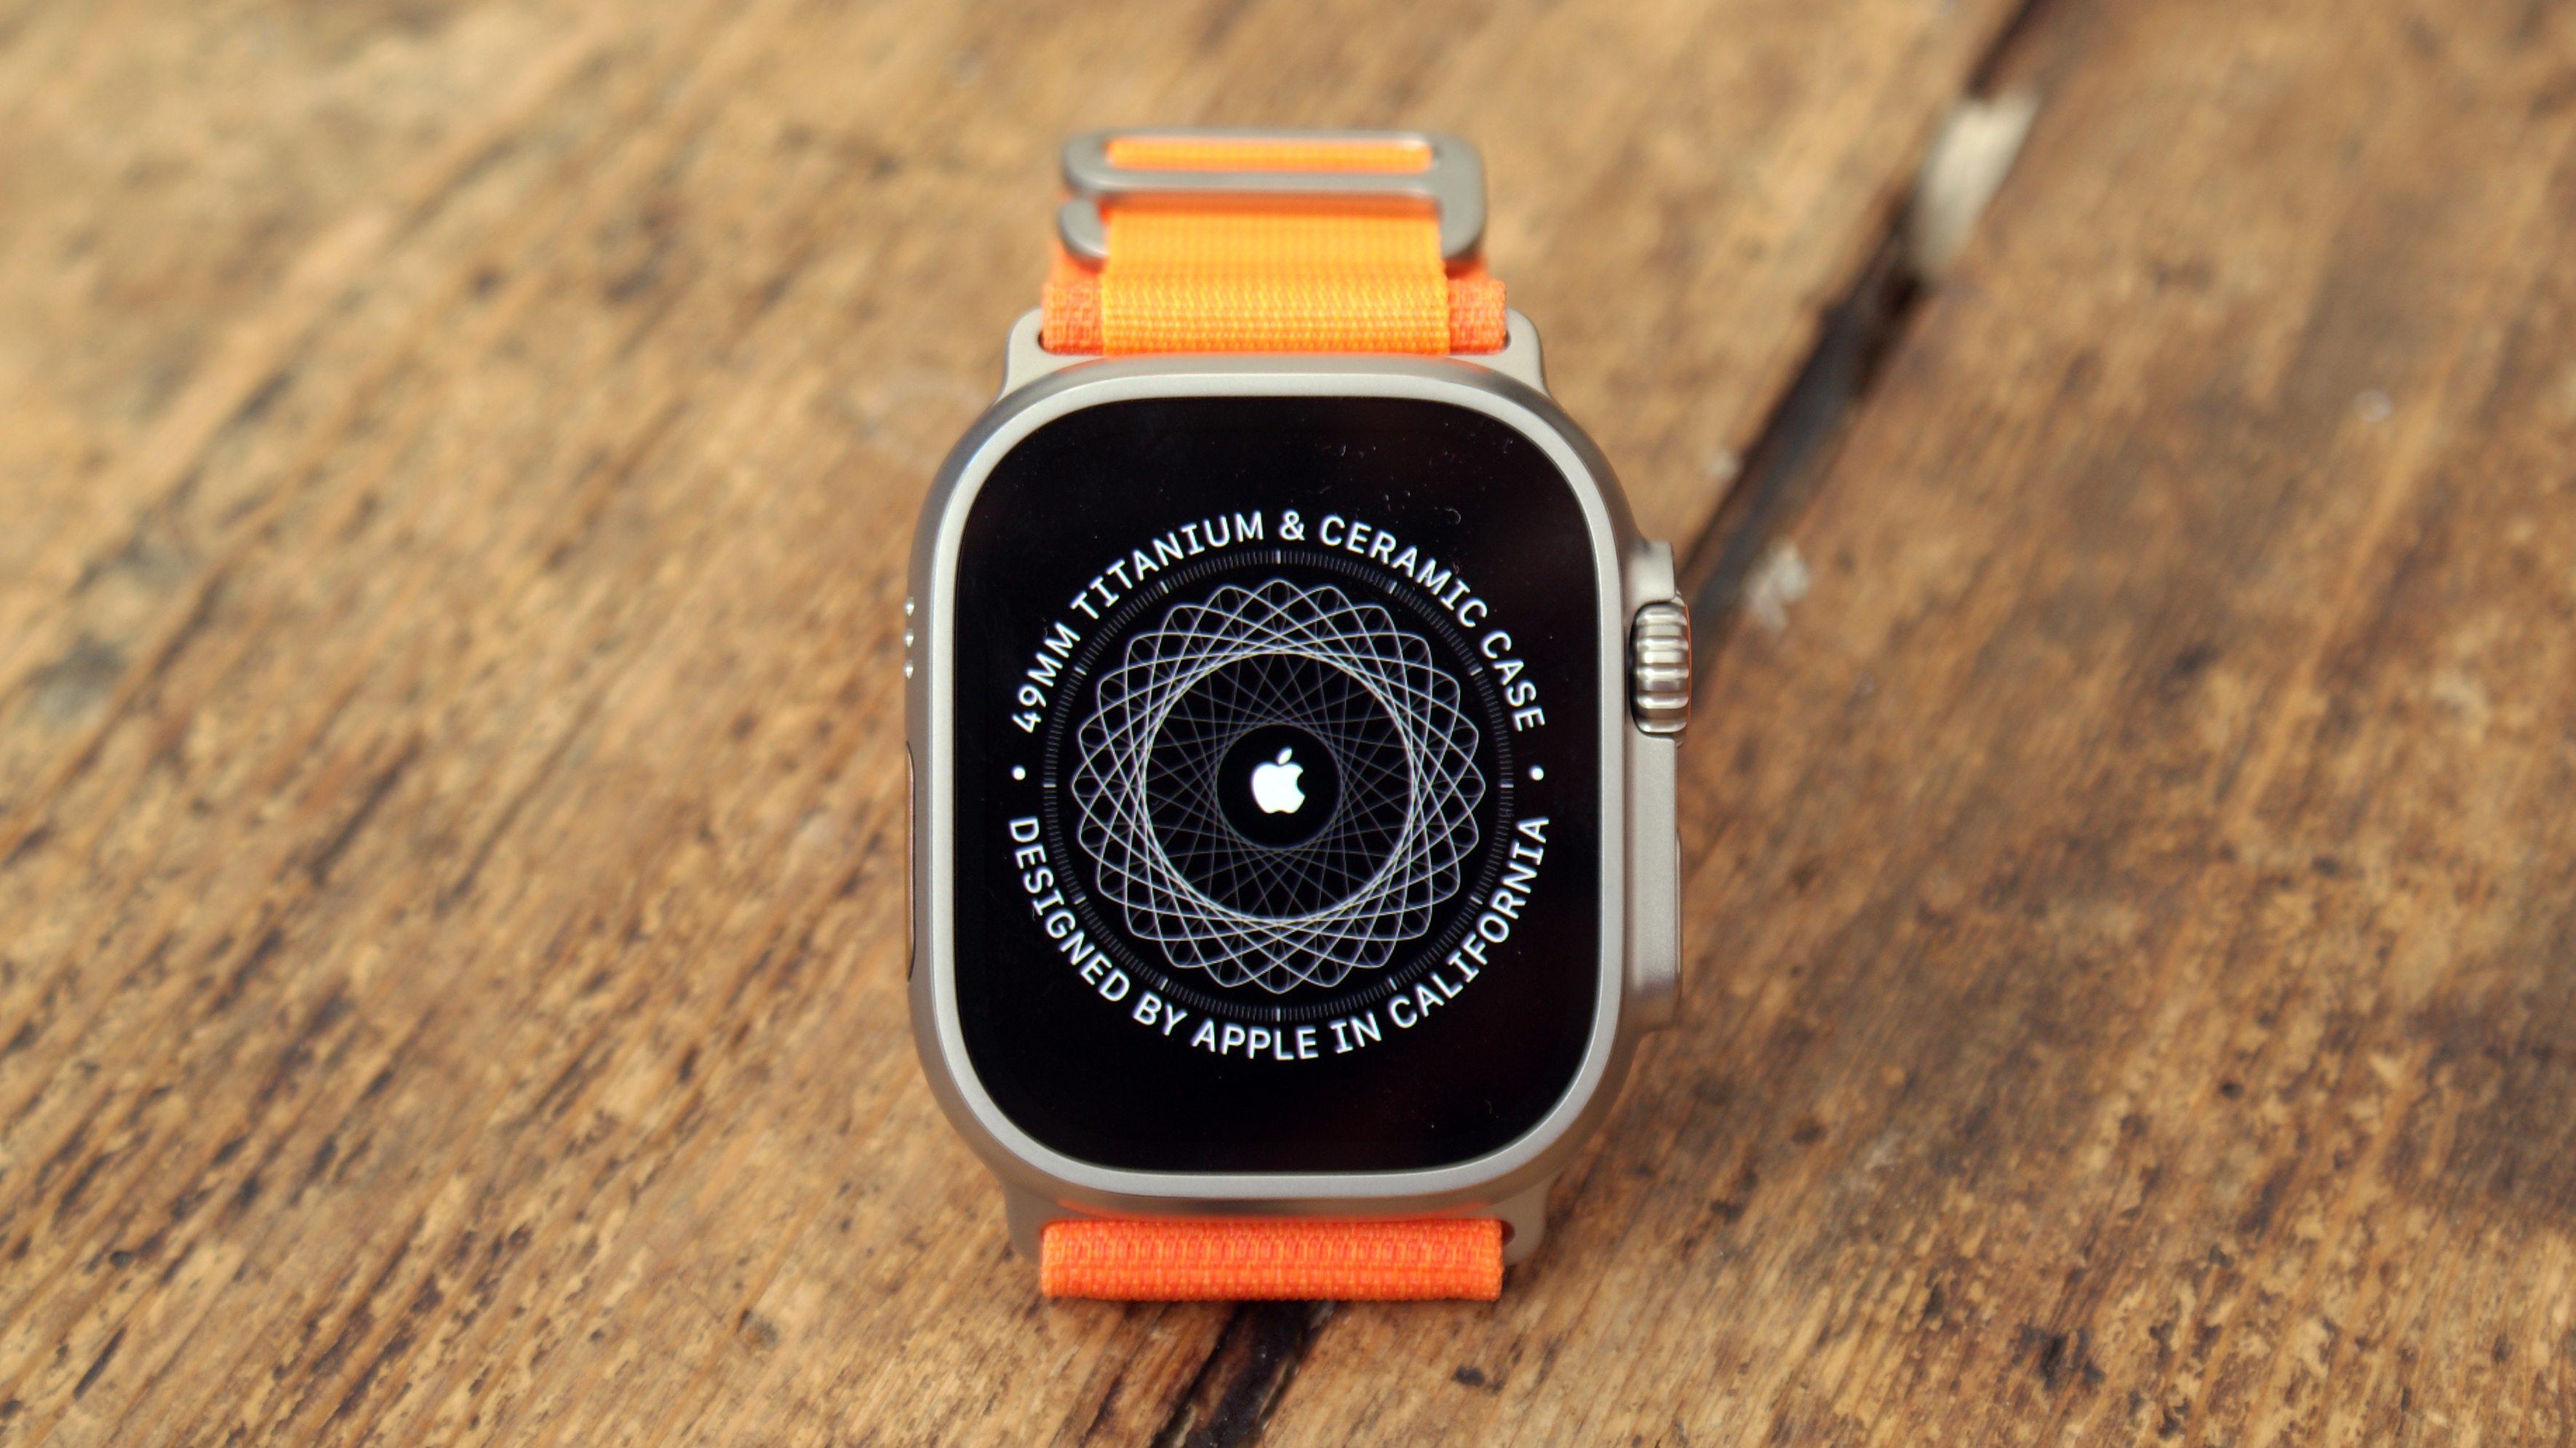 Apple Watch Ultra with orange strap pictured on a wooden table